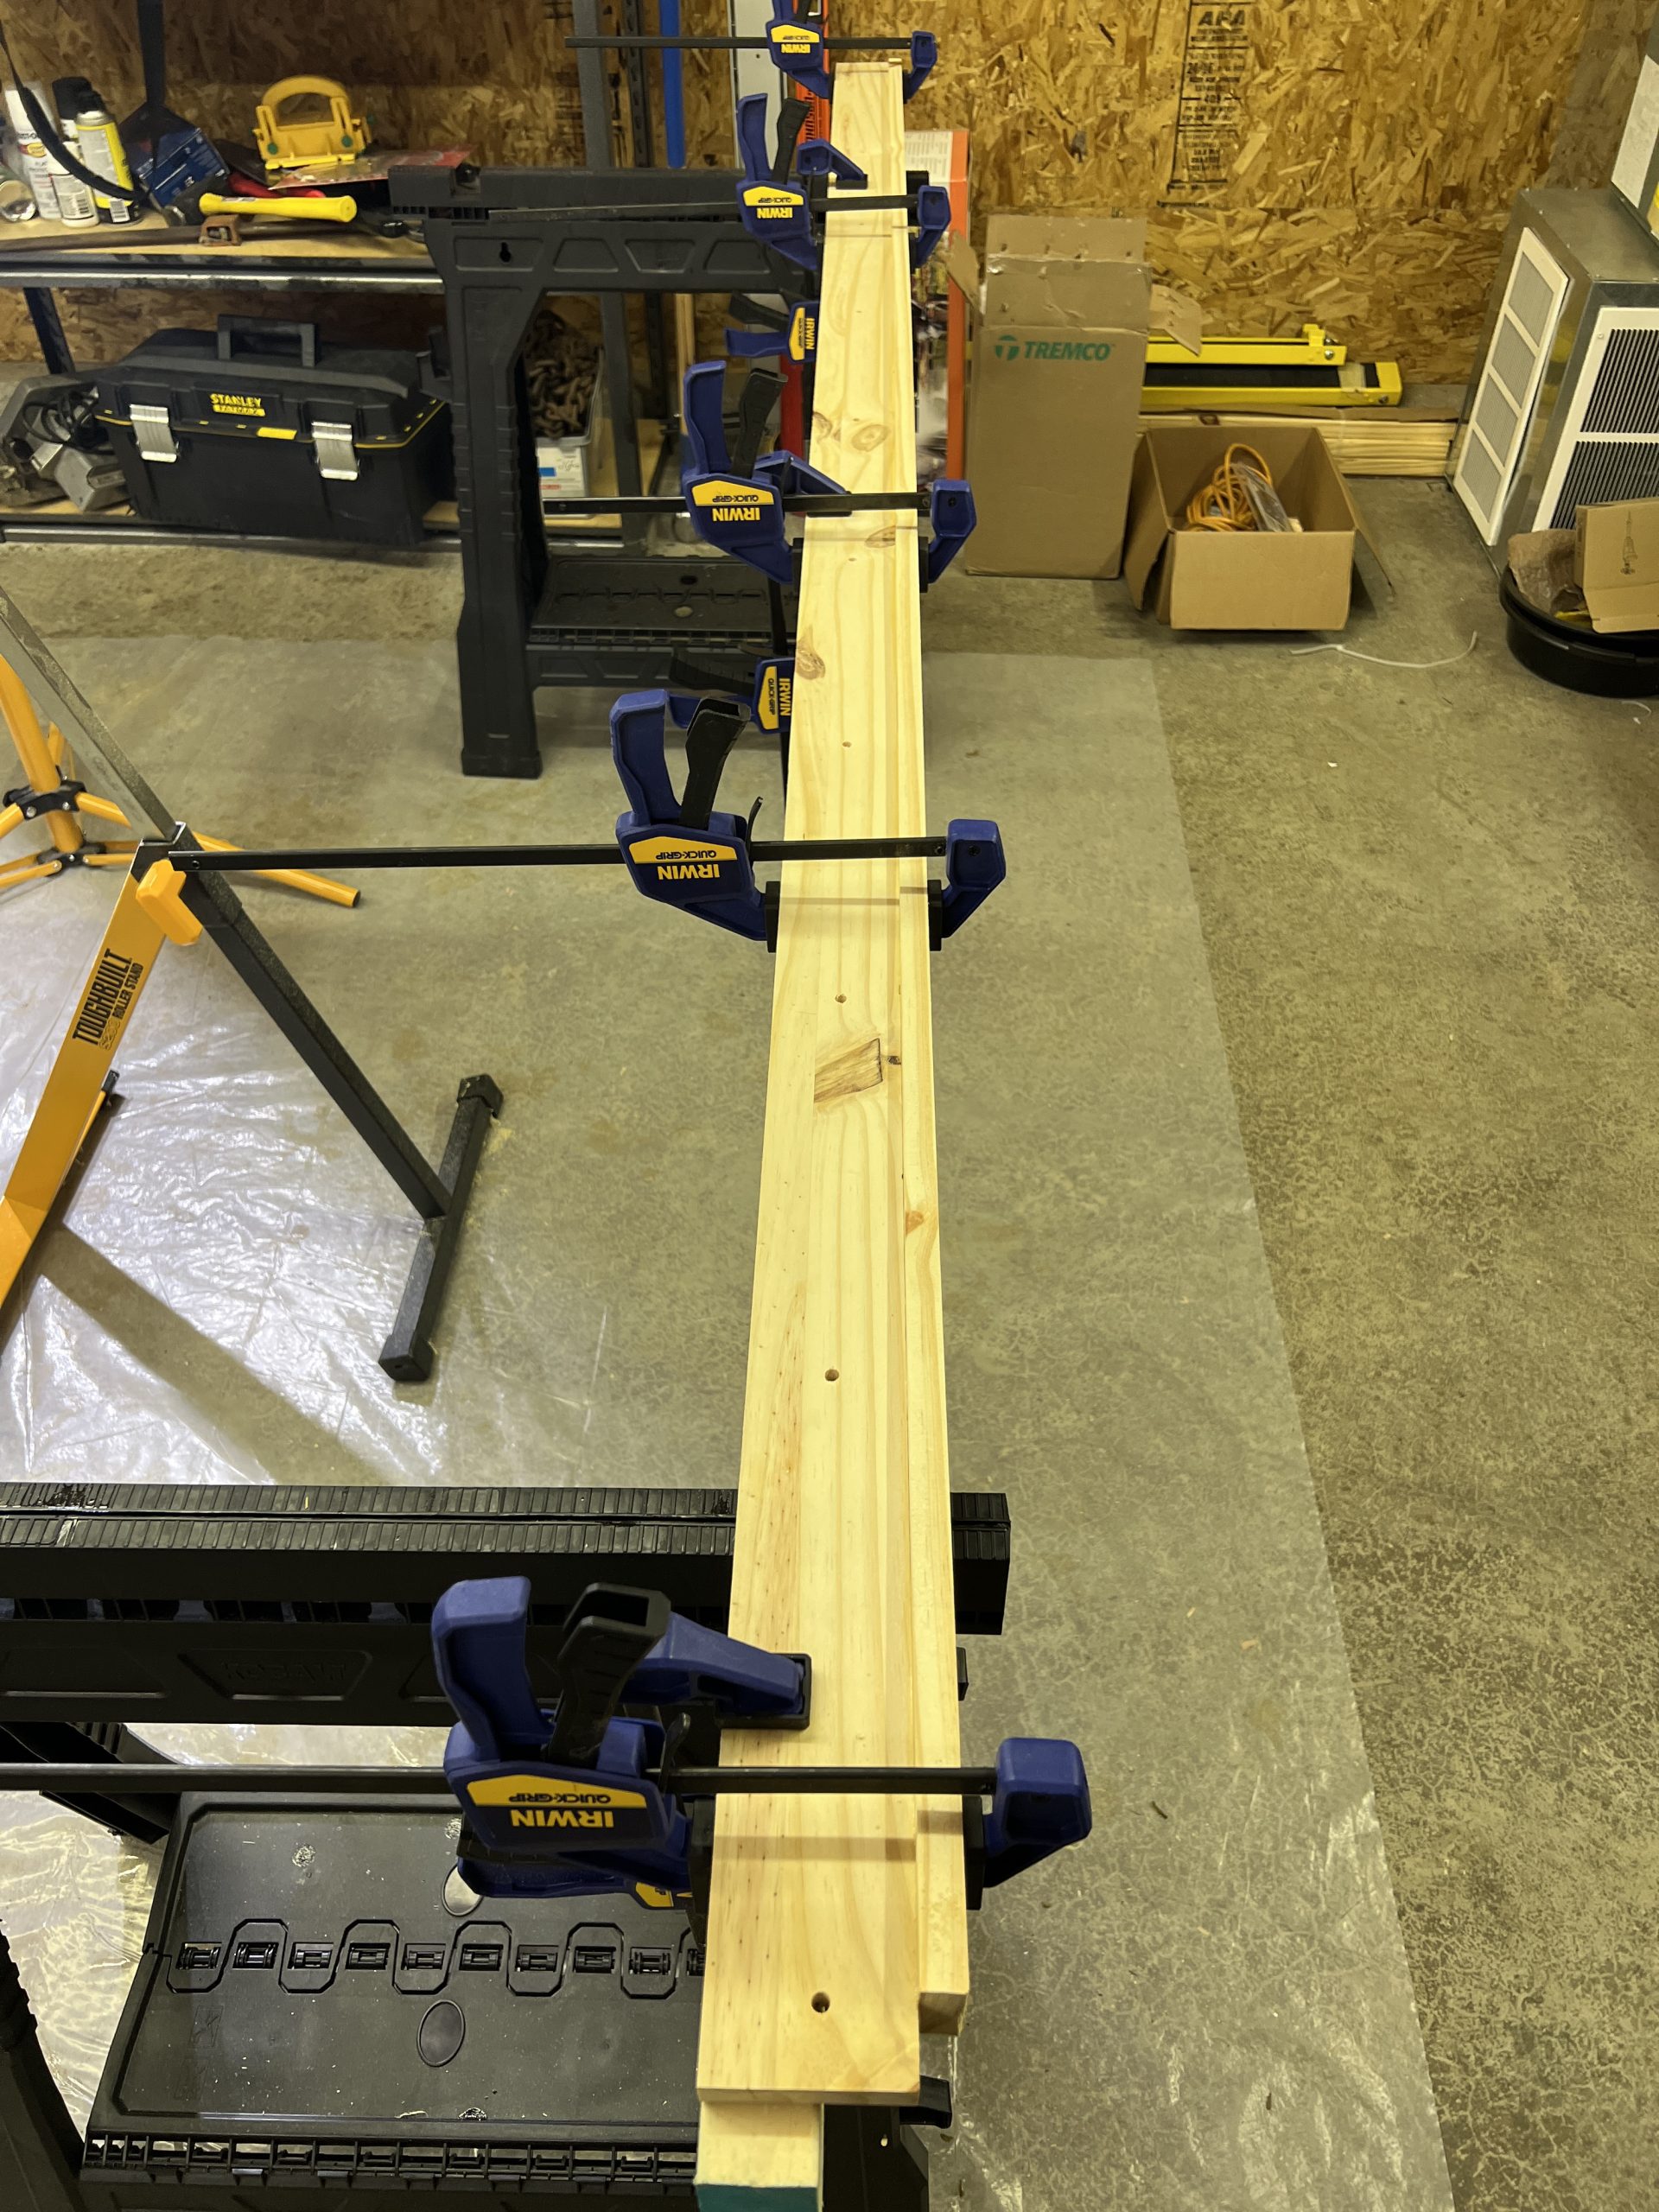 The large jig is a 87 inch board with several holes properly spaced. The jug is shown clamps that are holding everything together while the glue dries.